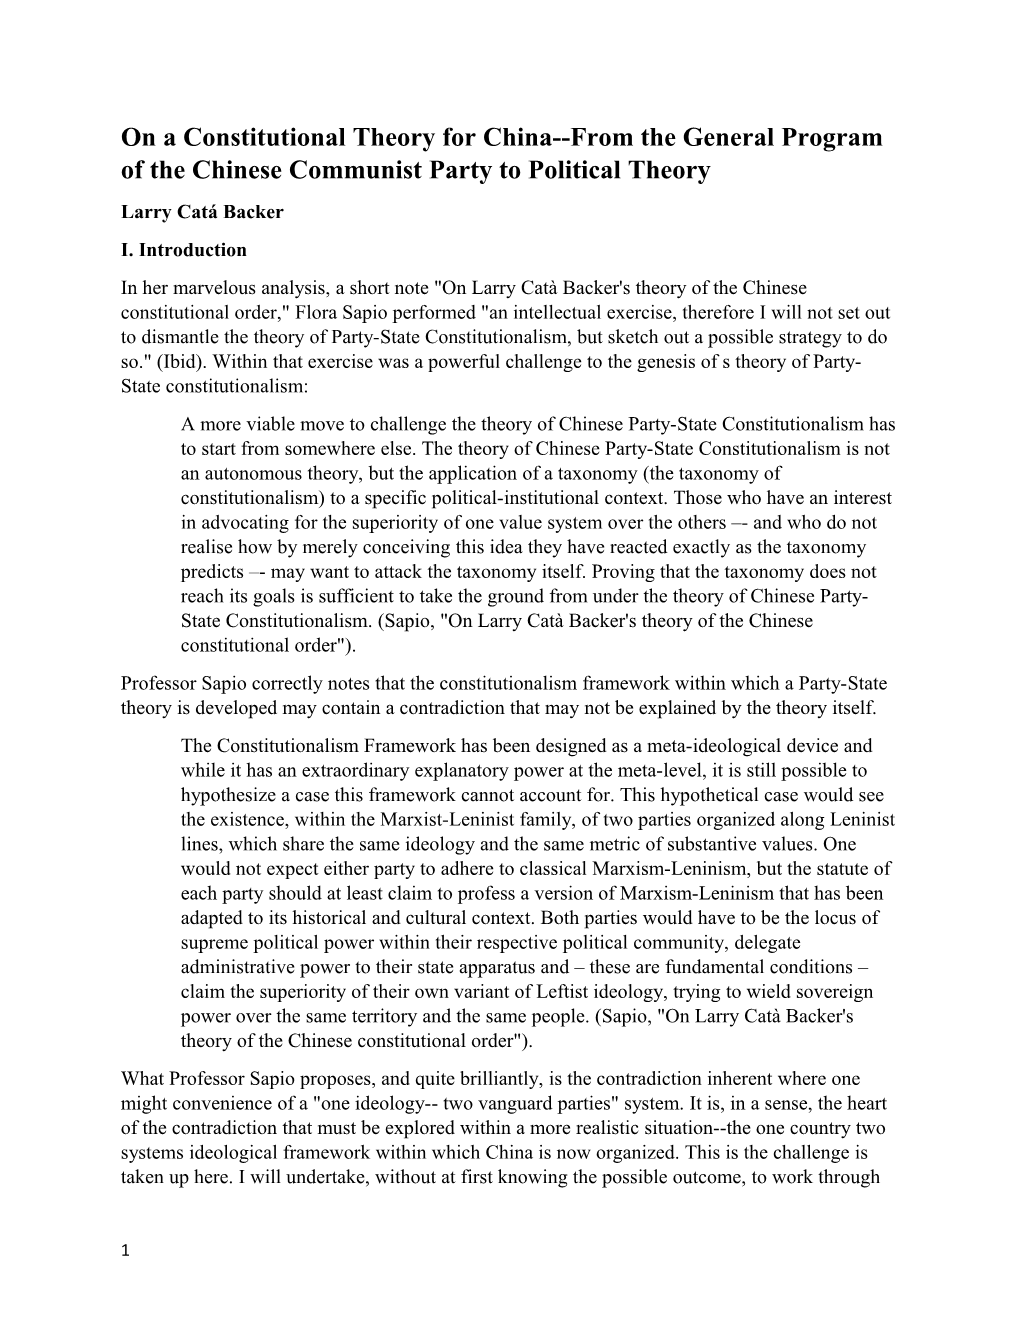 On a Constitutional Theory for China from the General Program of the Chinese Communist